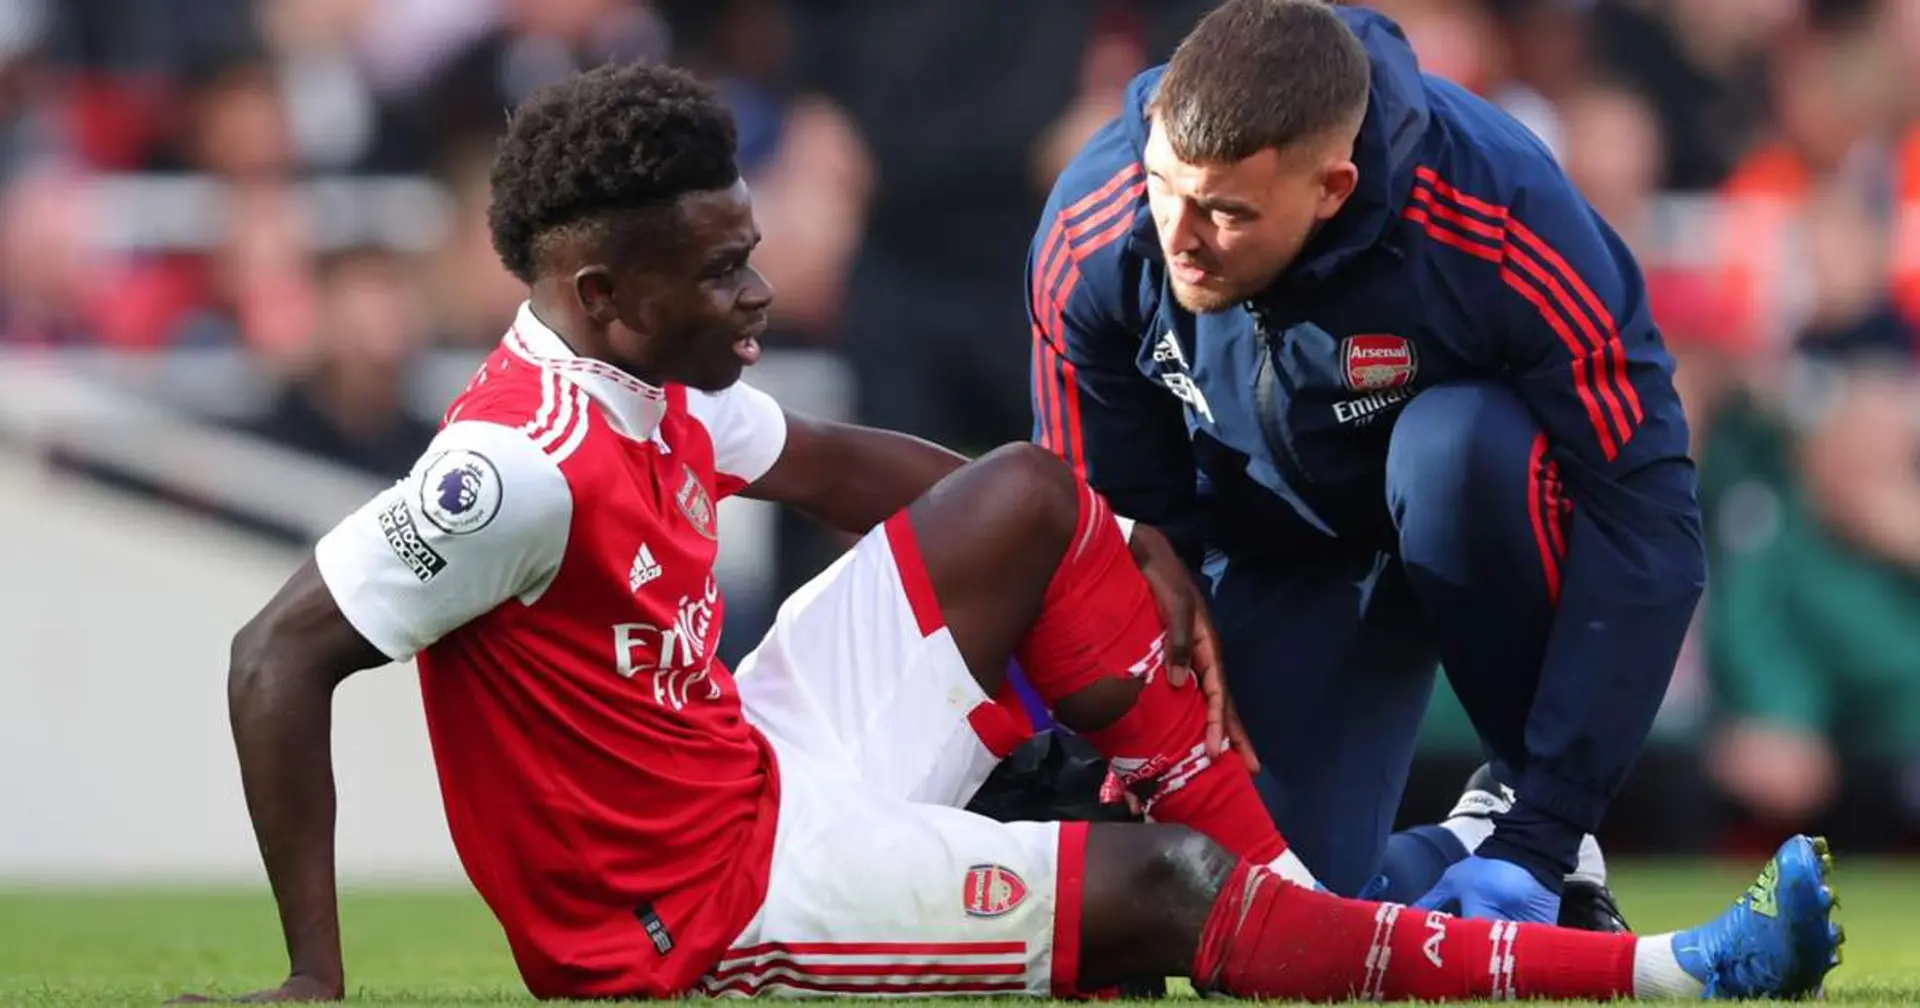 'We need Arsenal journos to lift this in the media': fans believe Bukayo Saka needs more protection from referees